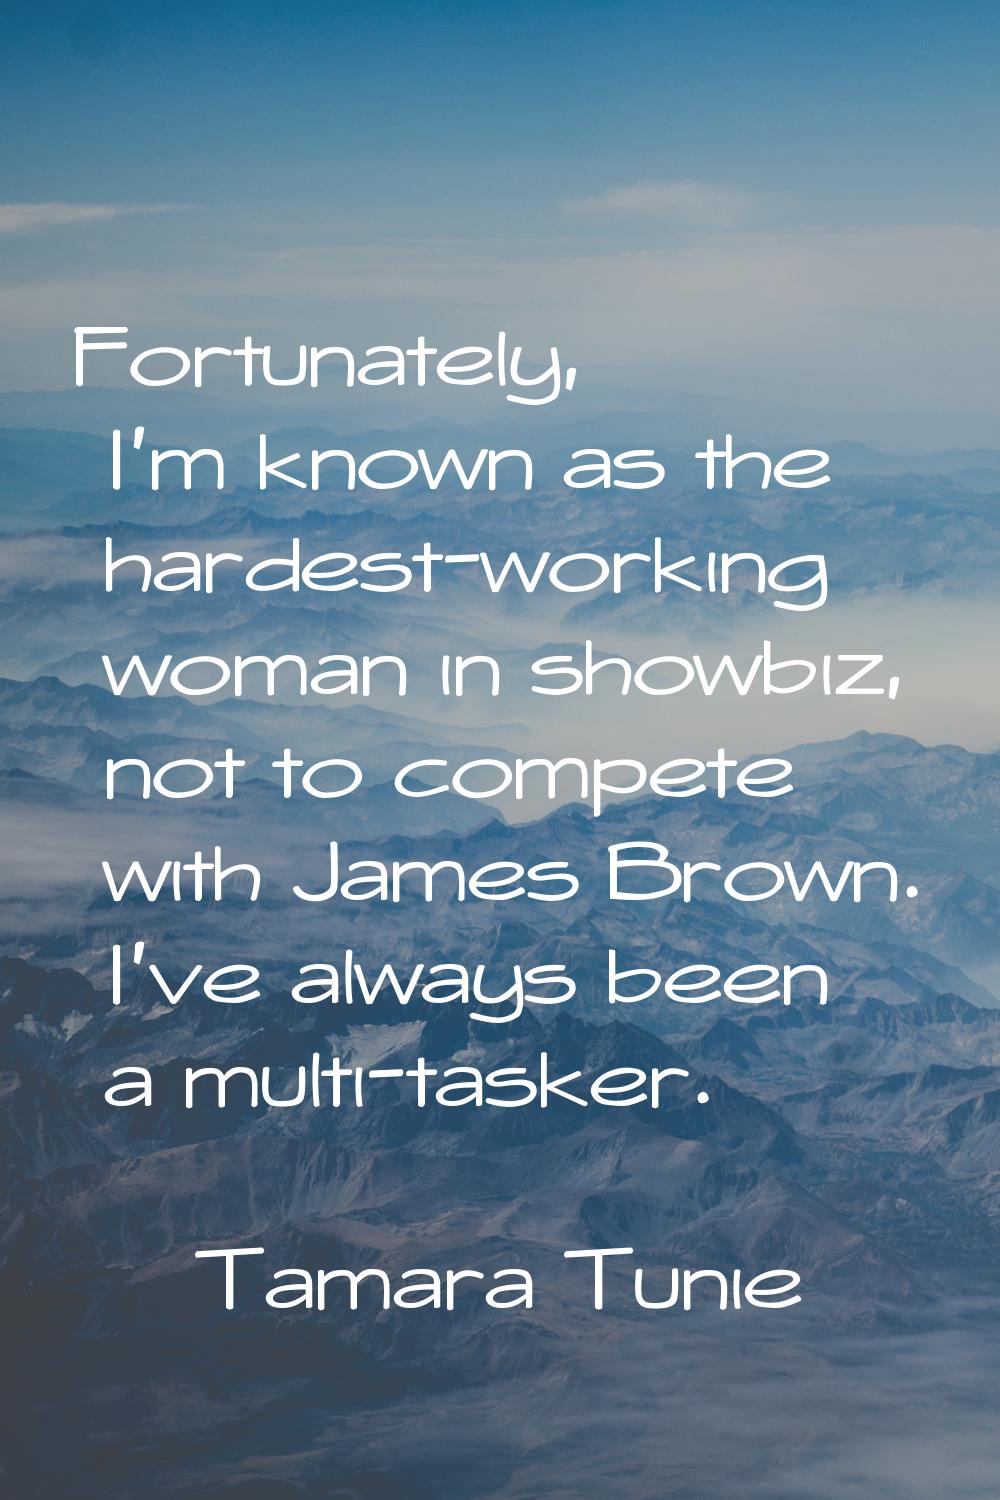 Fortunately, I'm known as the hardest-working woman in showbiz, not to compete with James Brown. I'